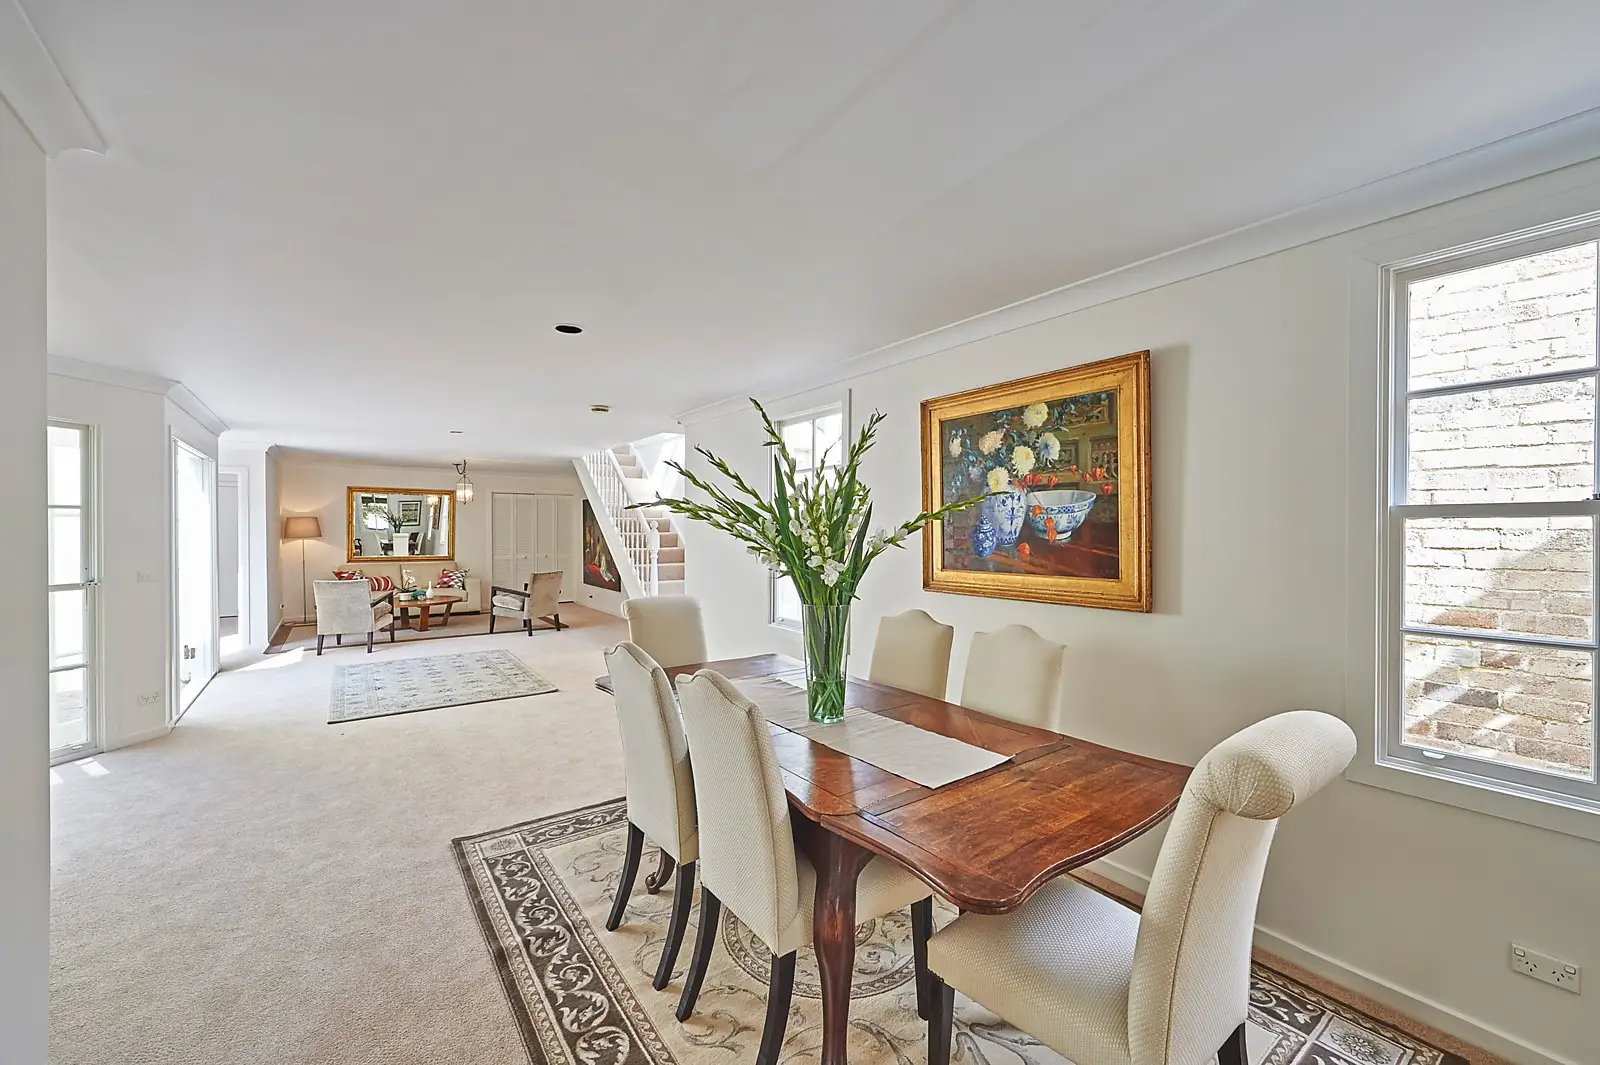 Photo #2: 15 Morrell Street, Woollahra - Sold by Sydney Sotheby's International Realty